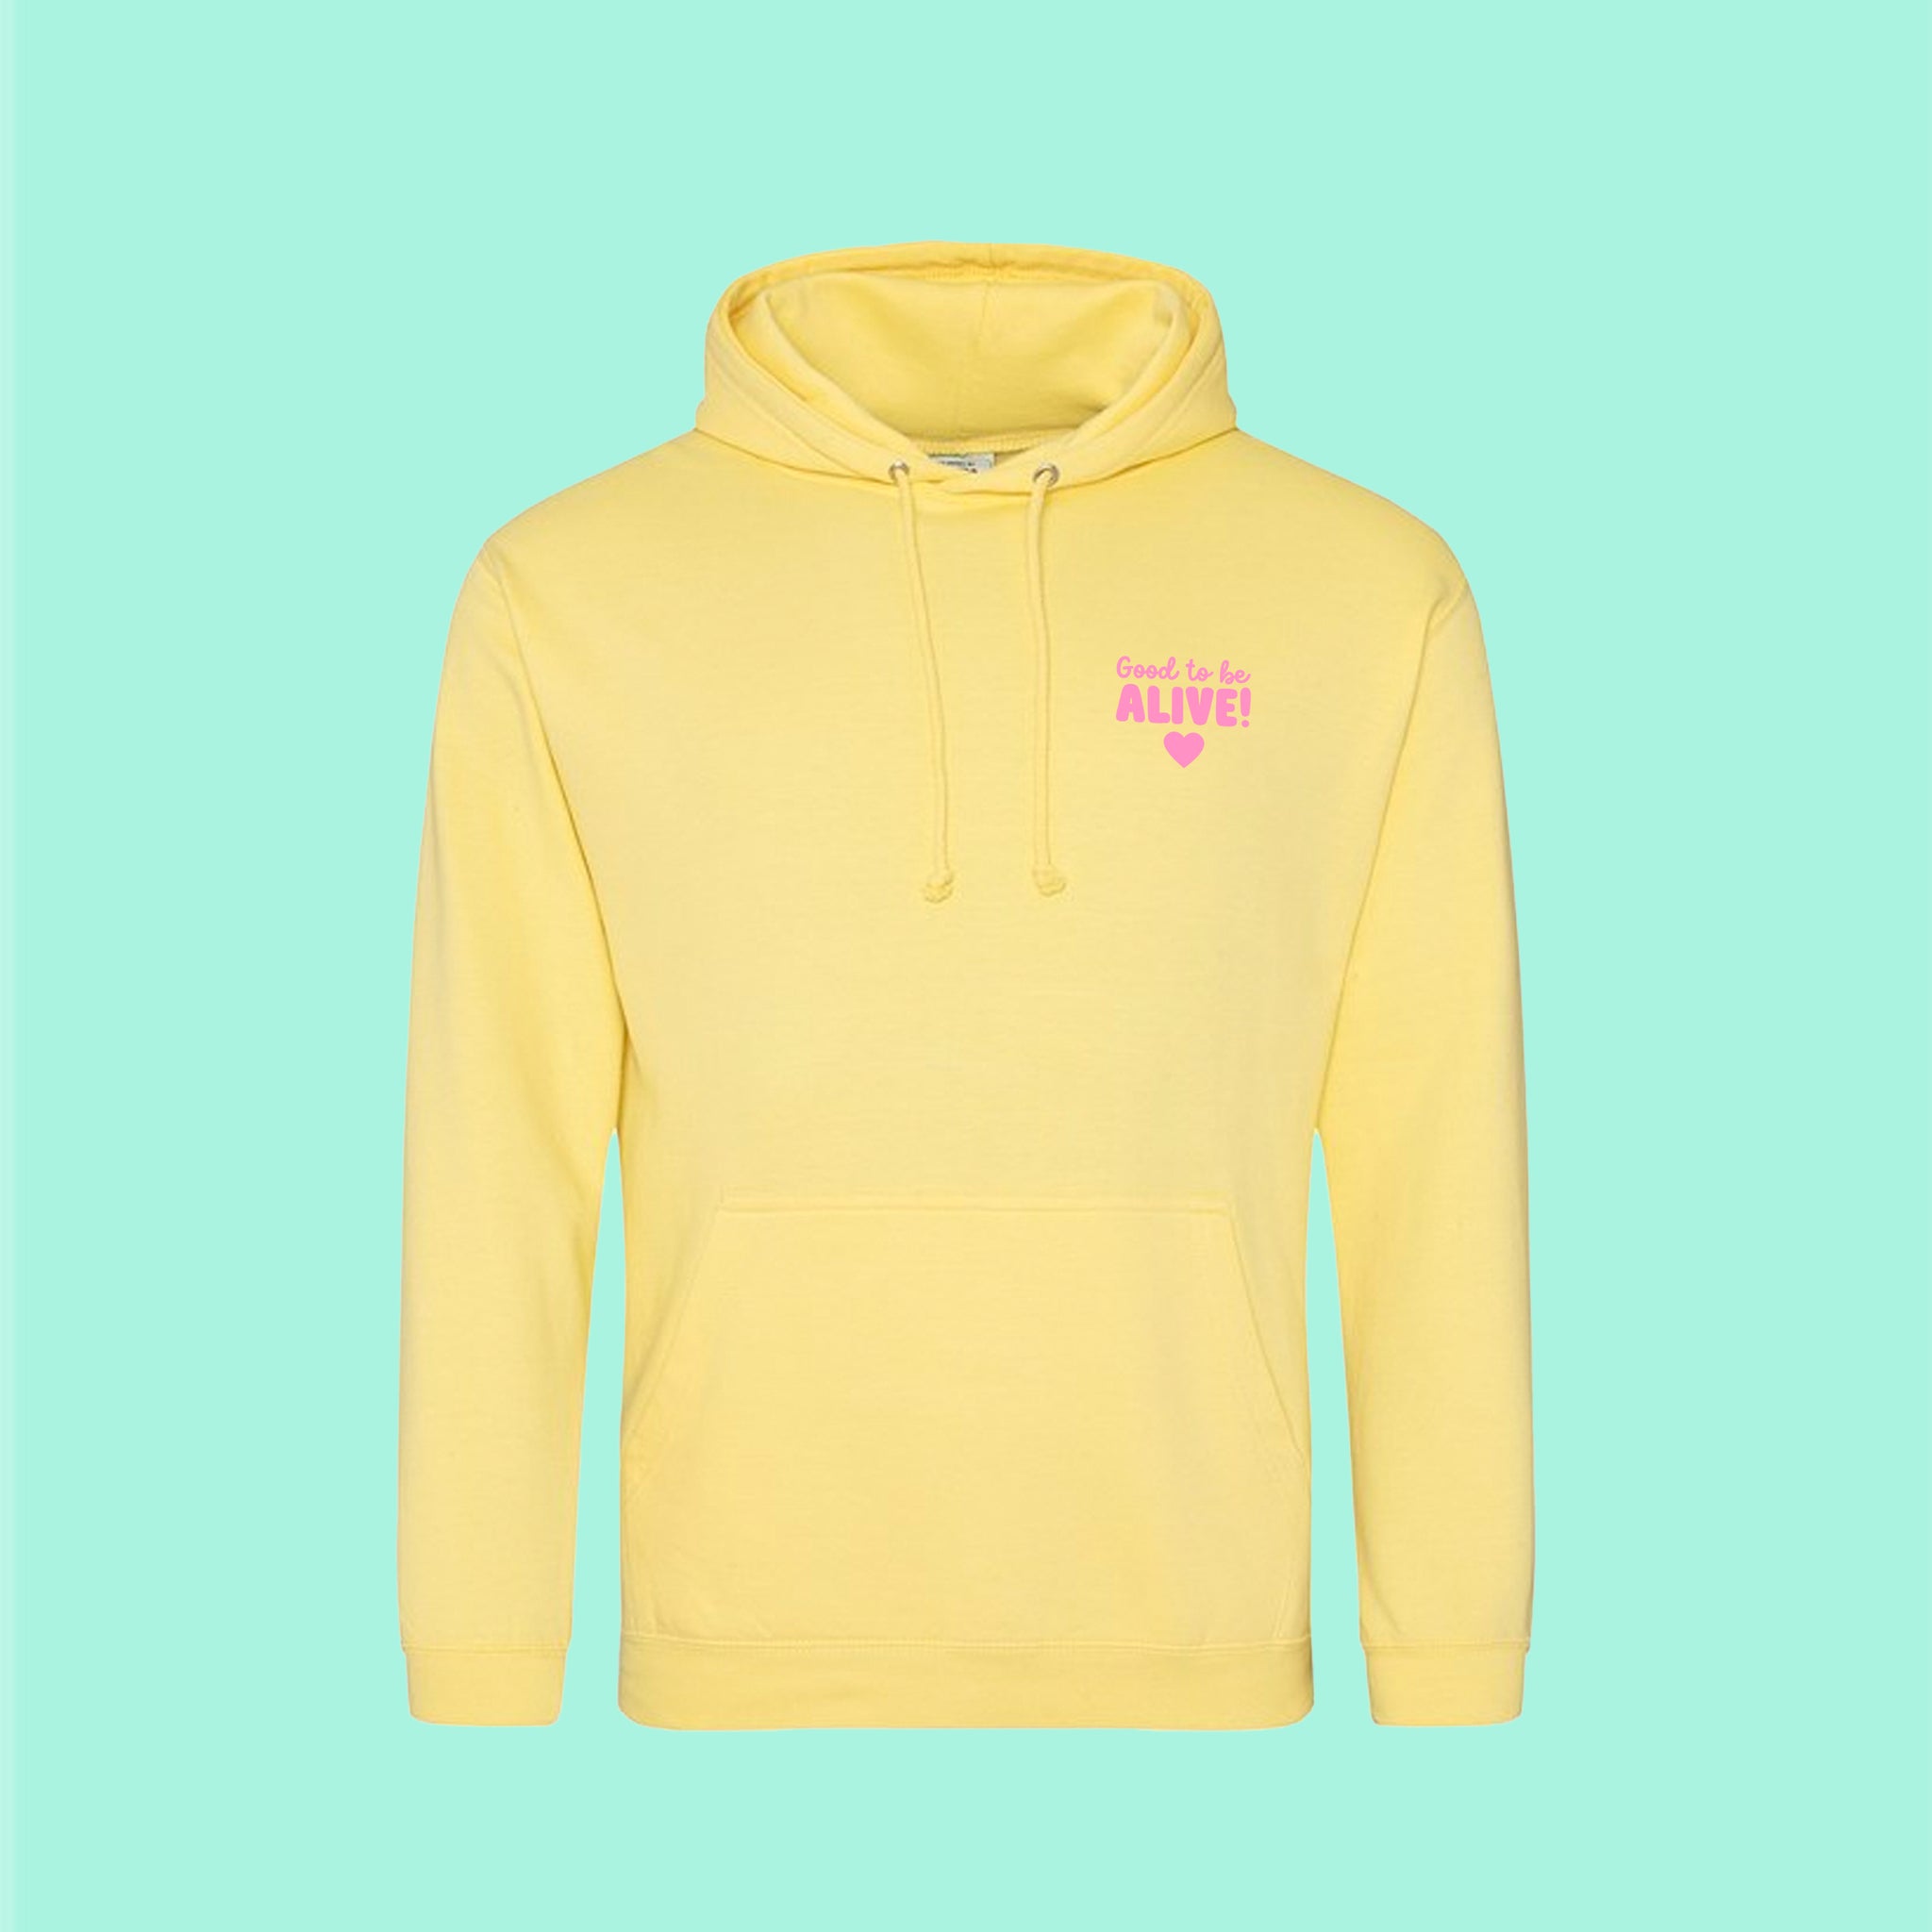 Good to be alive hoodie